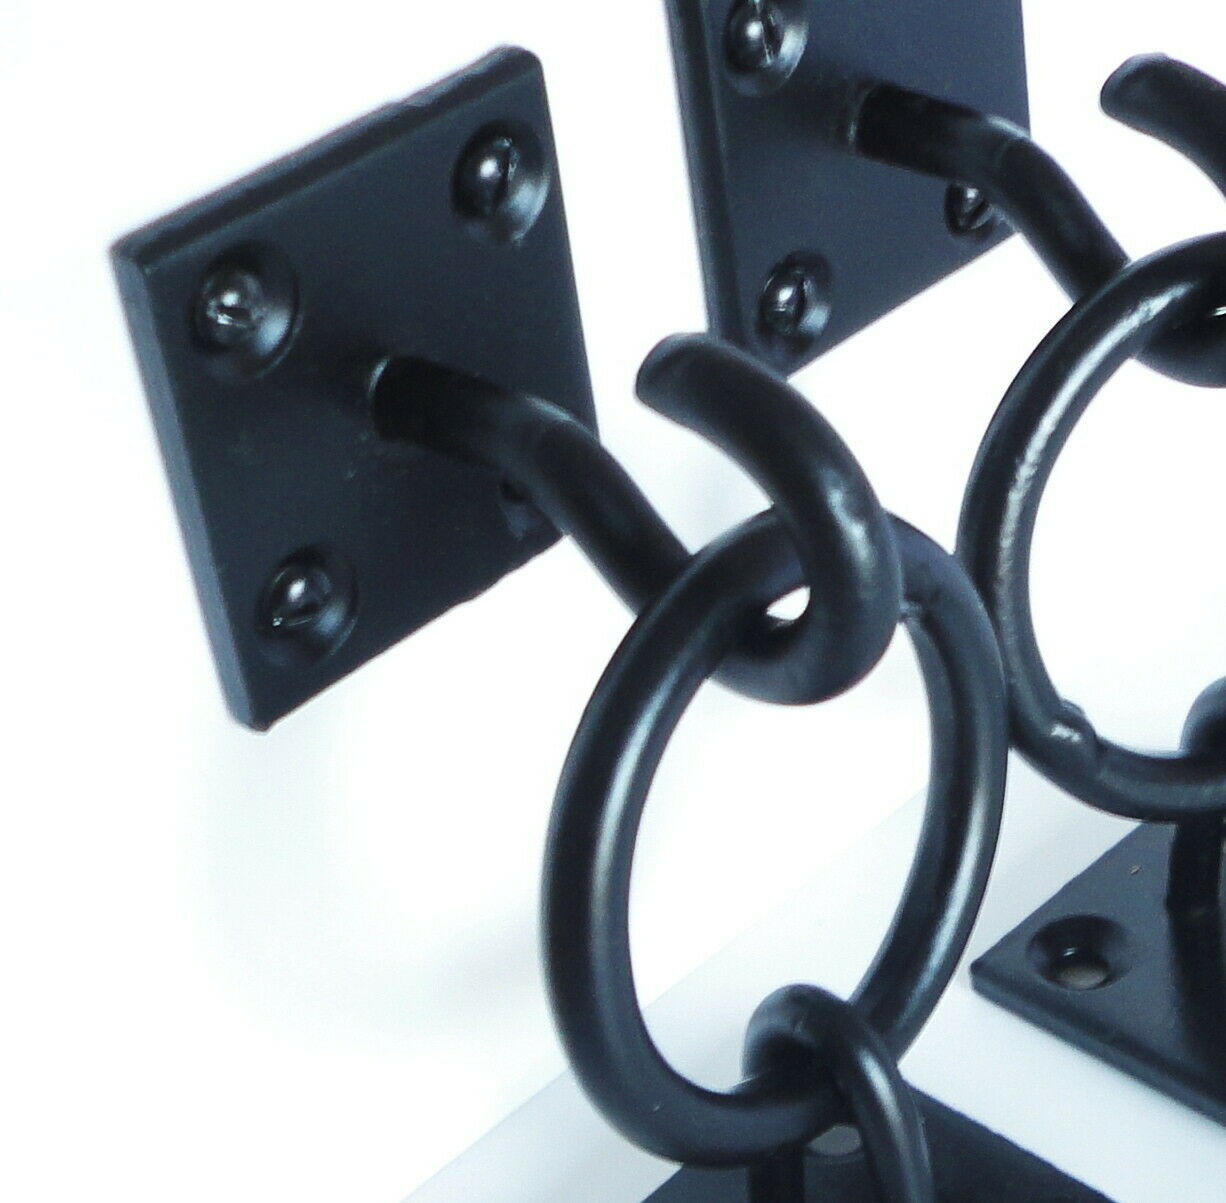 Rustic Unique Shelf Brackets x 2 Hanging Hook on Ring / Chain Black Floating